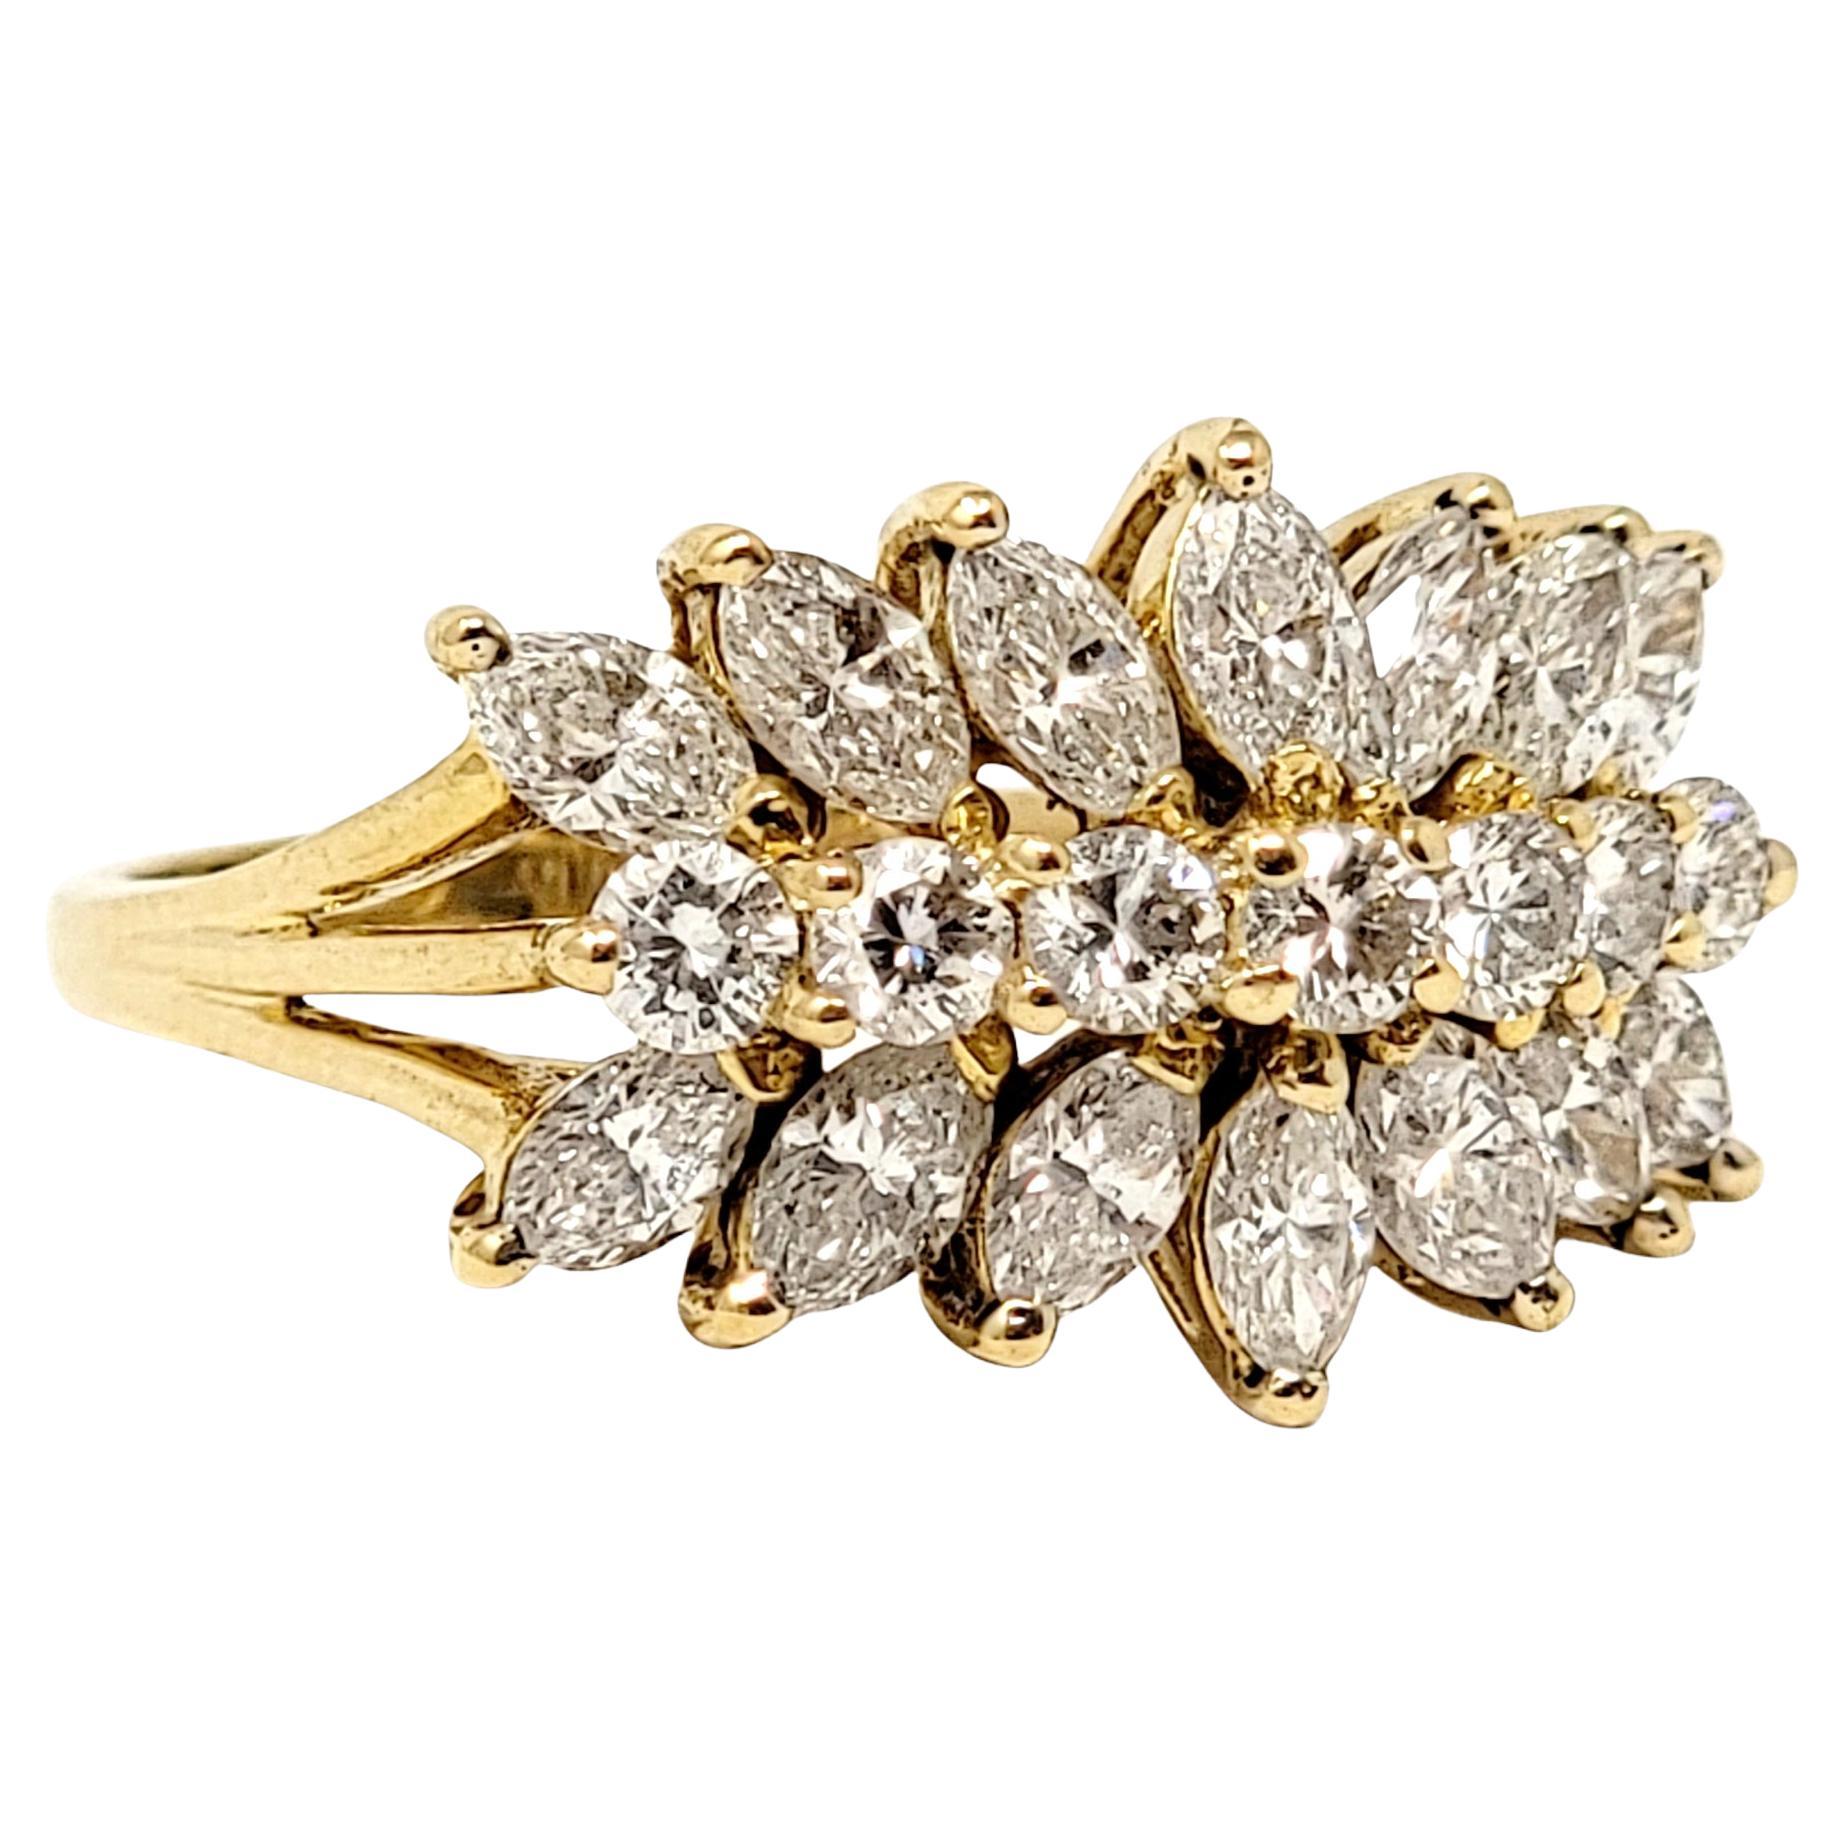 Marquis and Round Brilliant Three Row Diamond Ring in 18 Karat Yellow Gold In Good Condition For Sale In Scottsdale, AZ